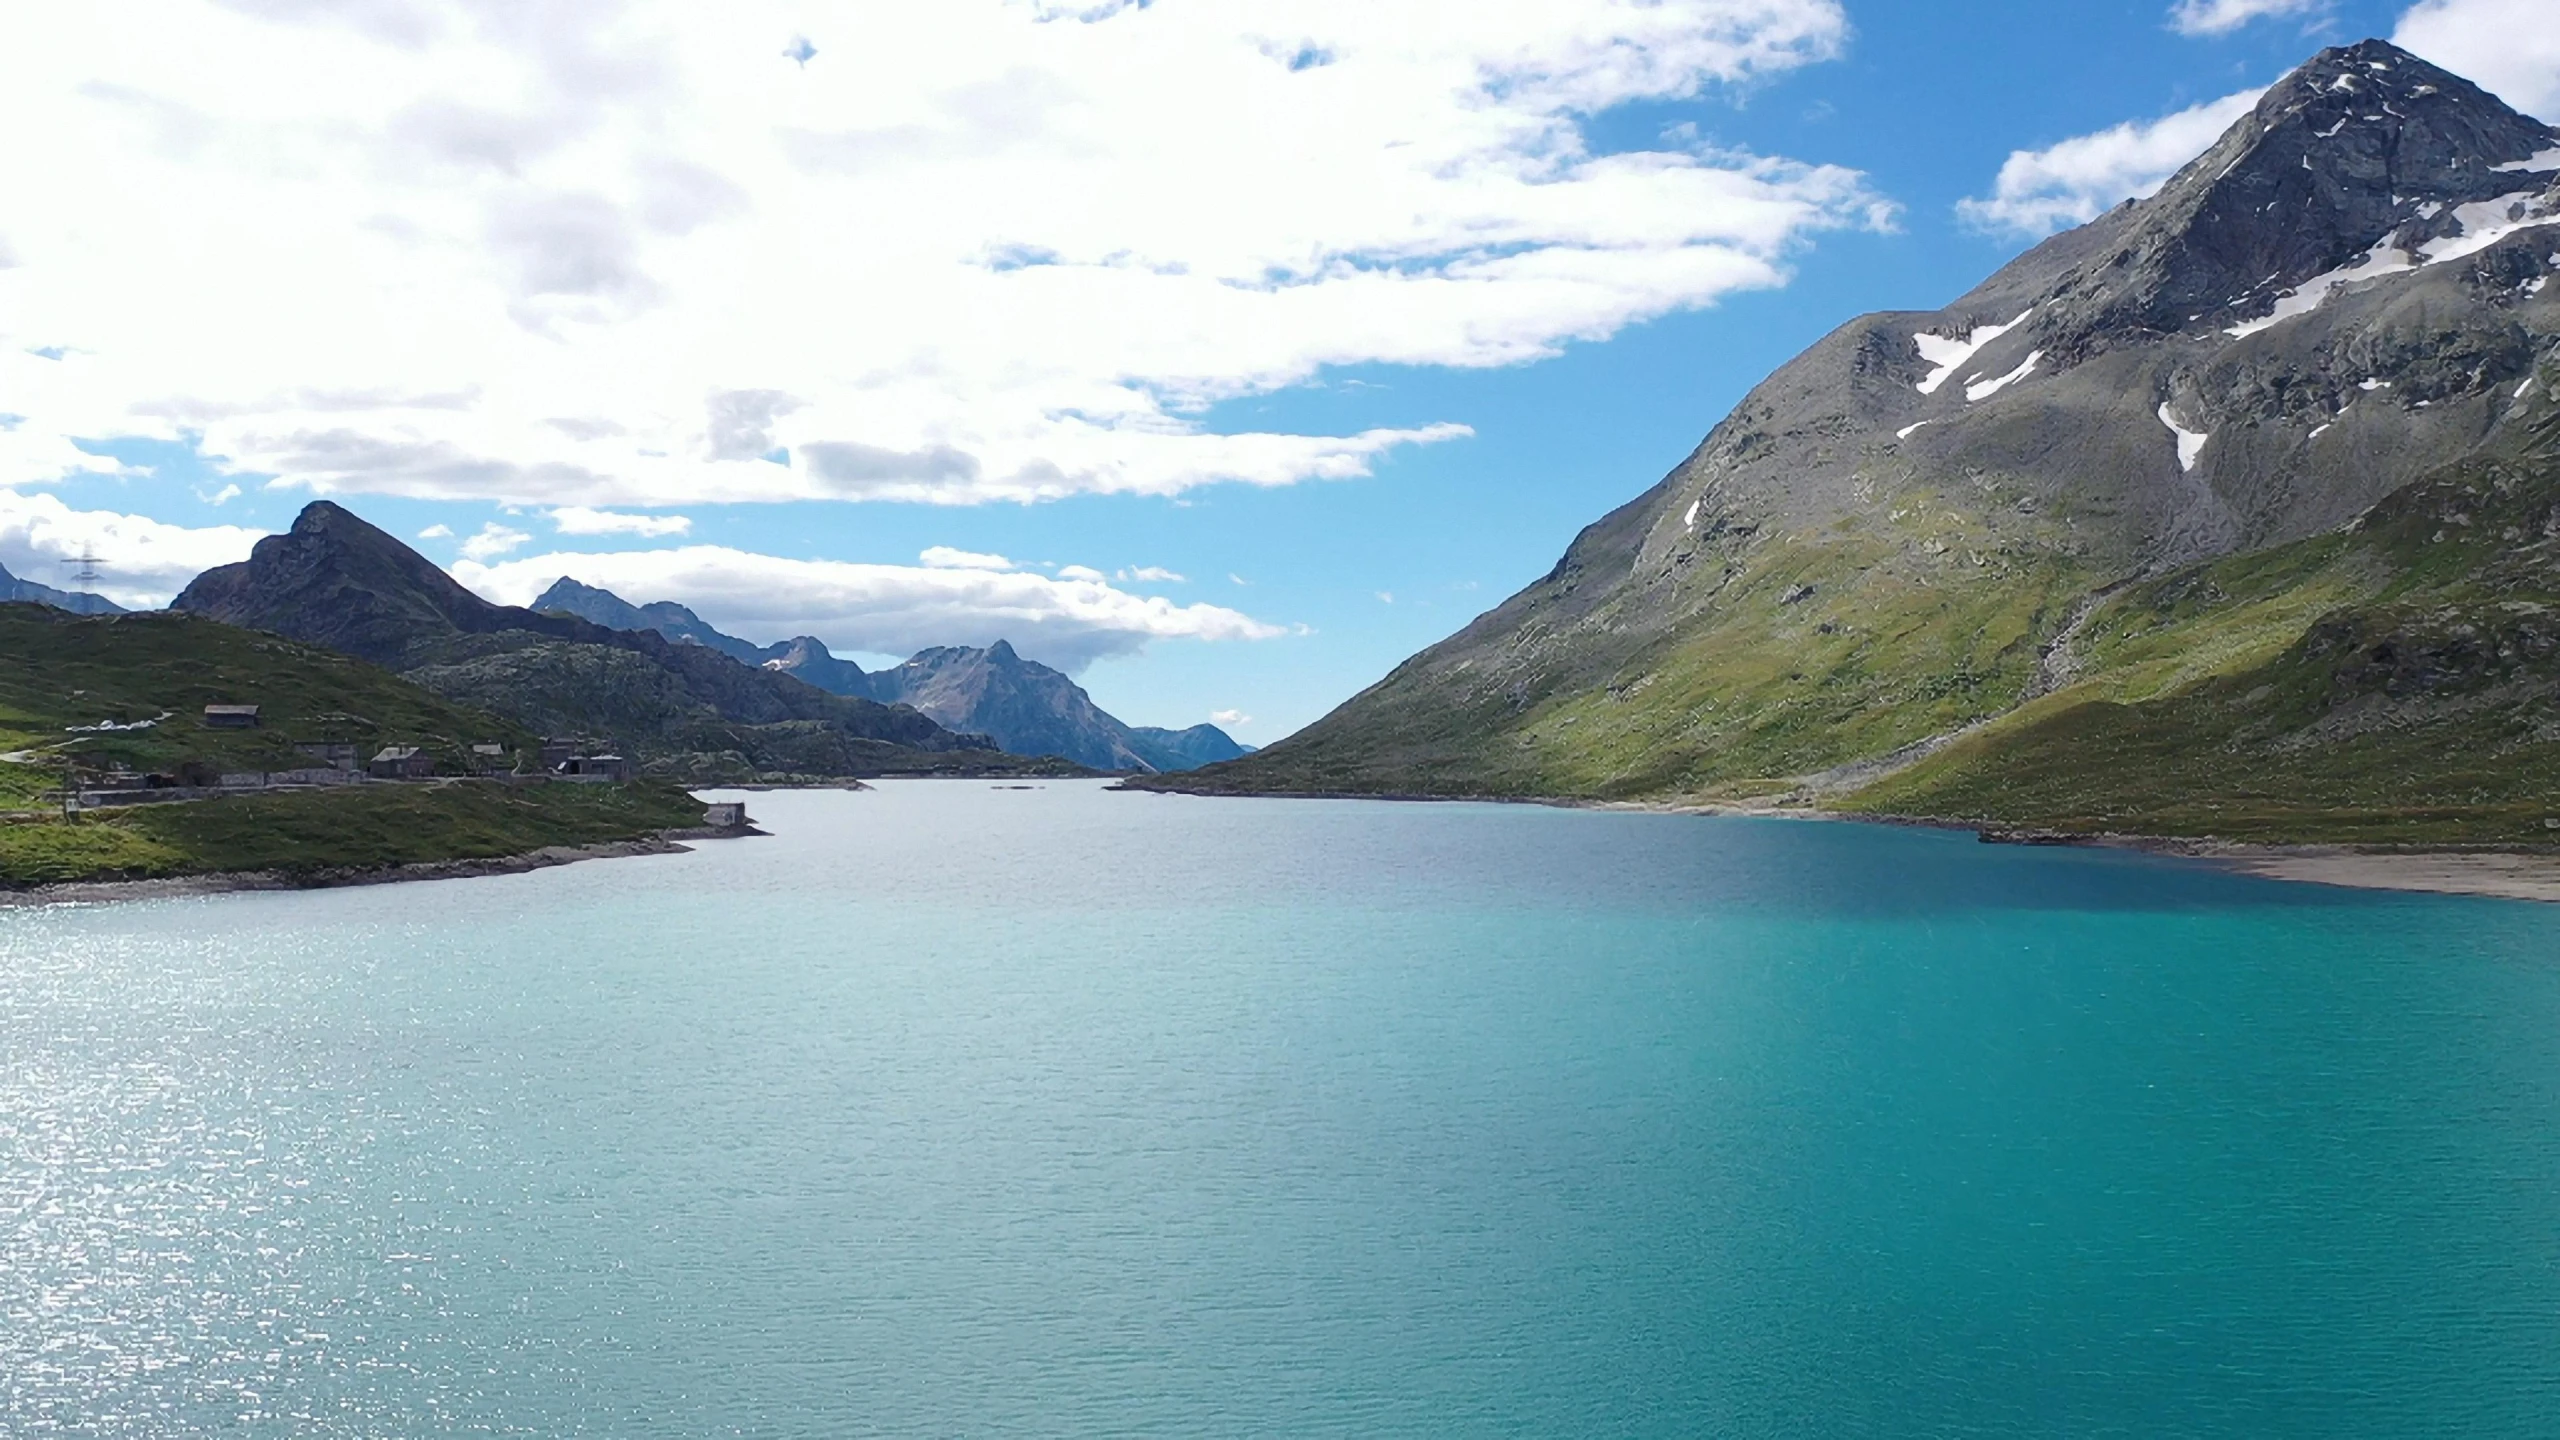 the blue lake is surrounded by some mountains